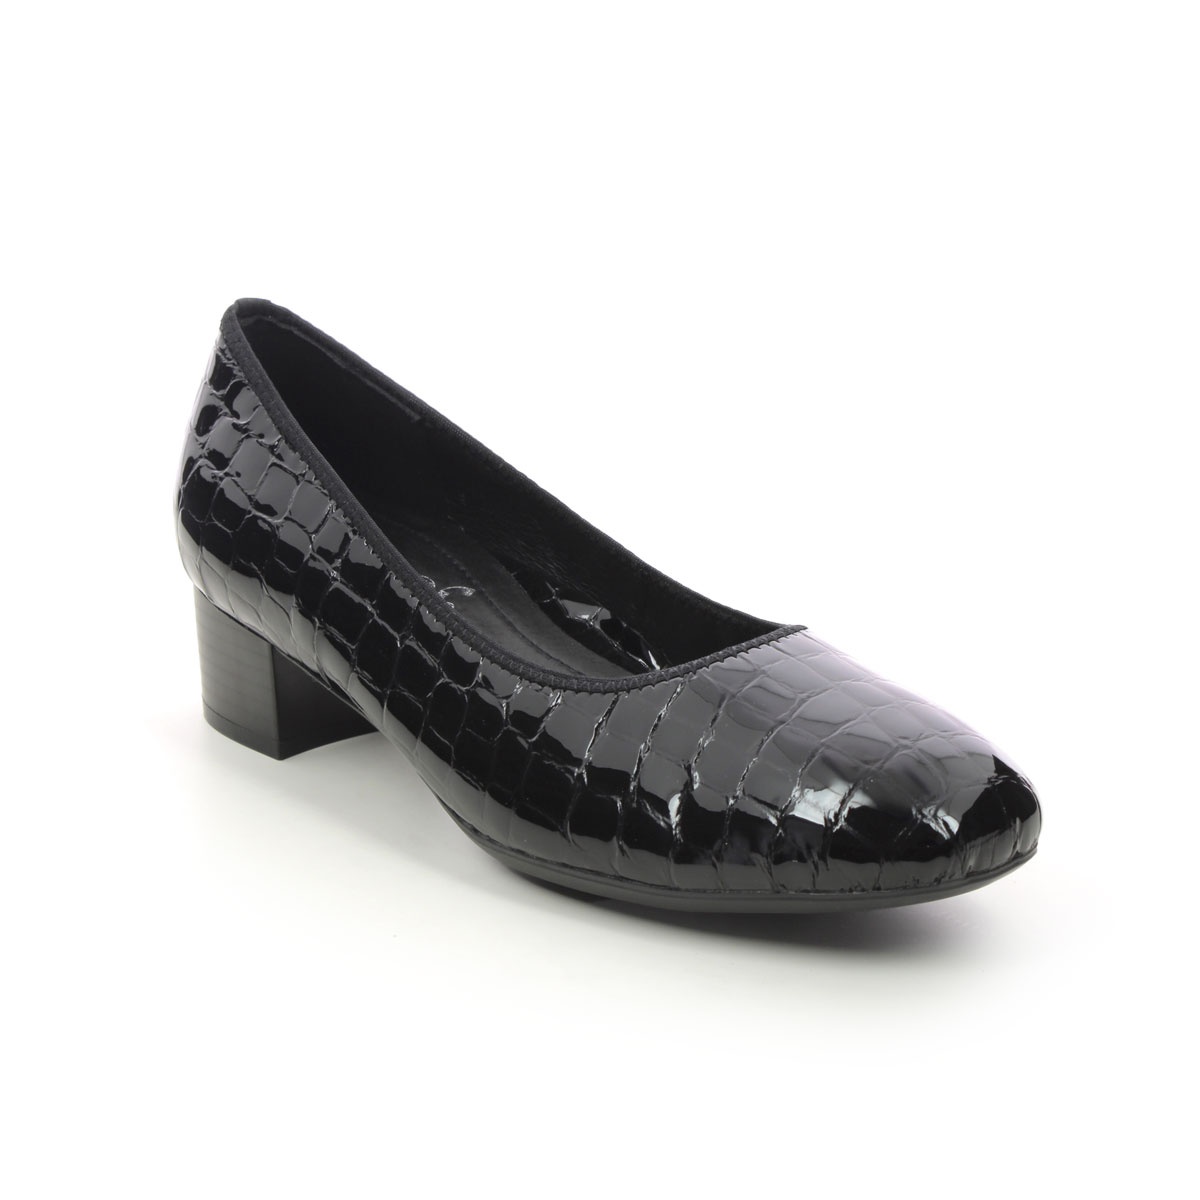 Rieker 49260-02 Black croc Womens Court Shoes in a Plain Leather in Size 41